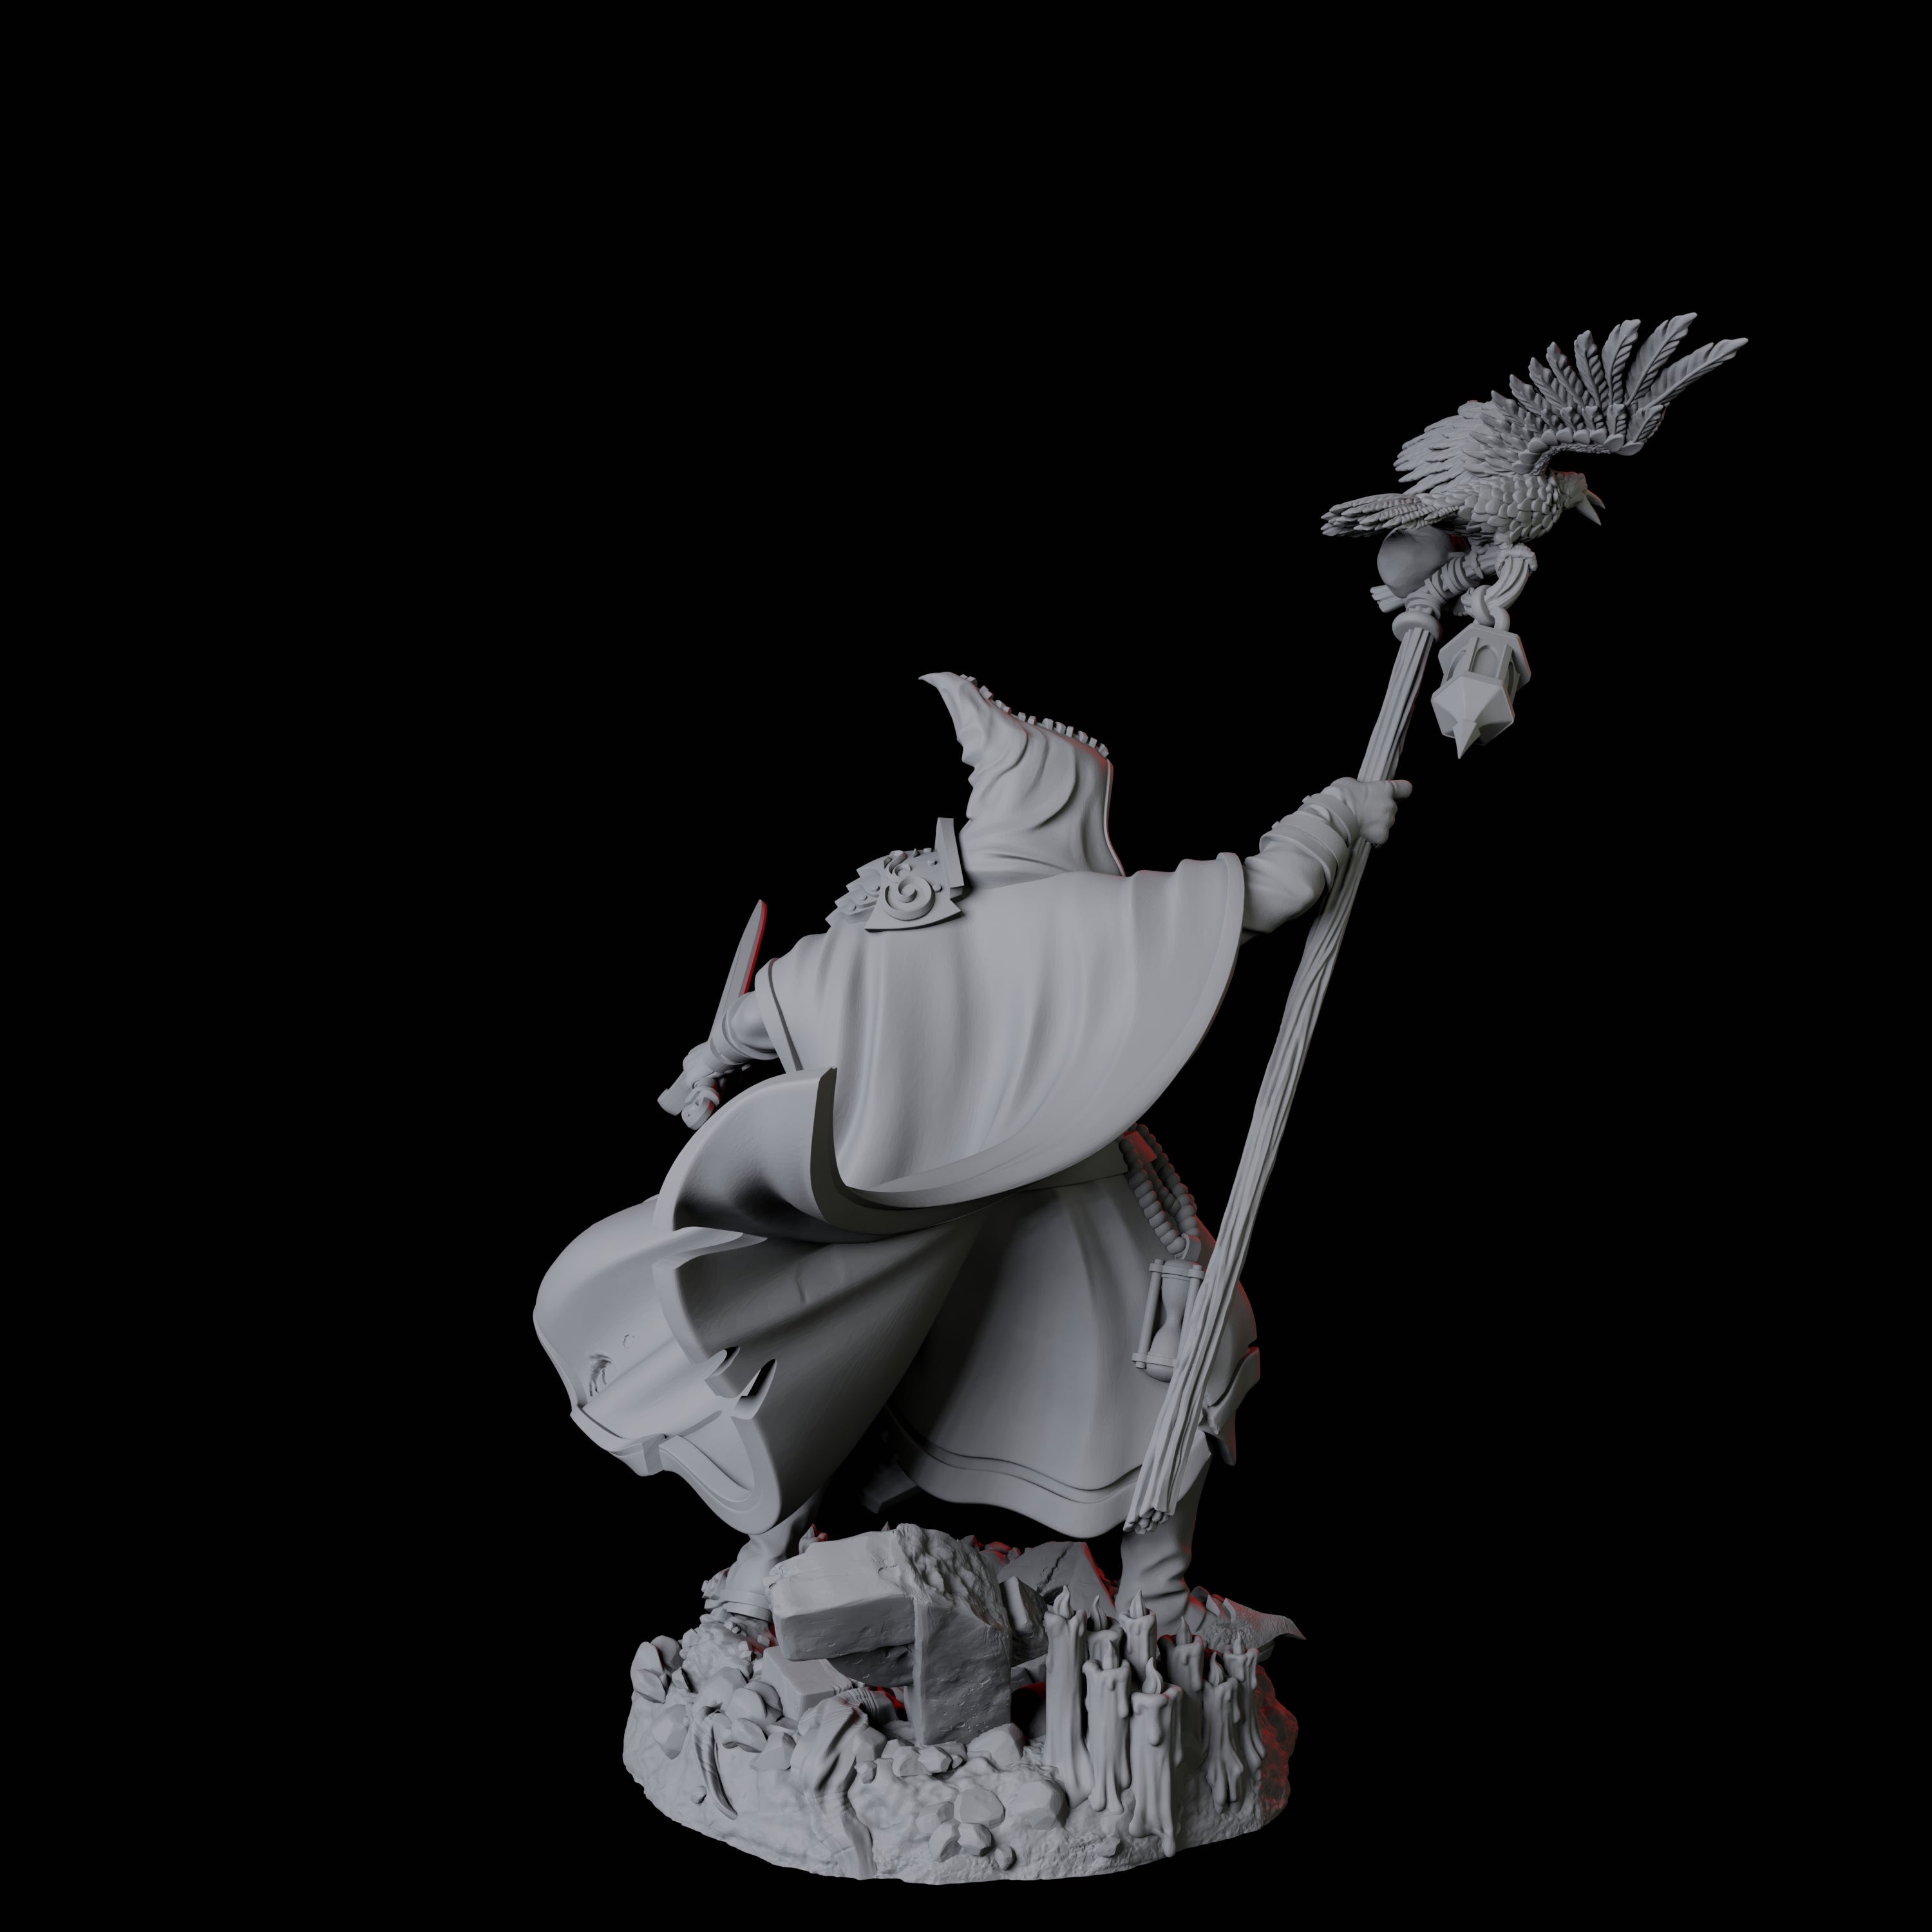 Creepy Gravedigger C Miniature for Dungeons and Dragons, Pathfinder or other TTRPGs